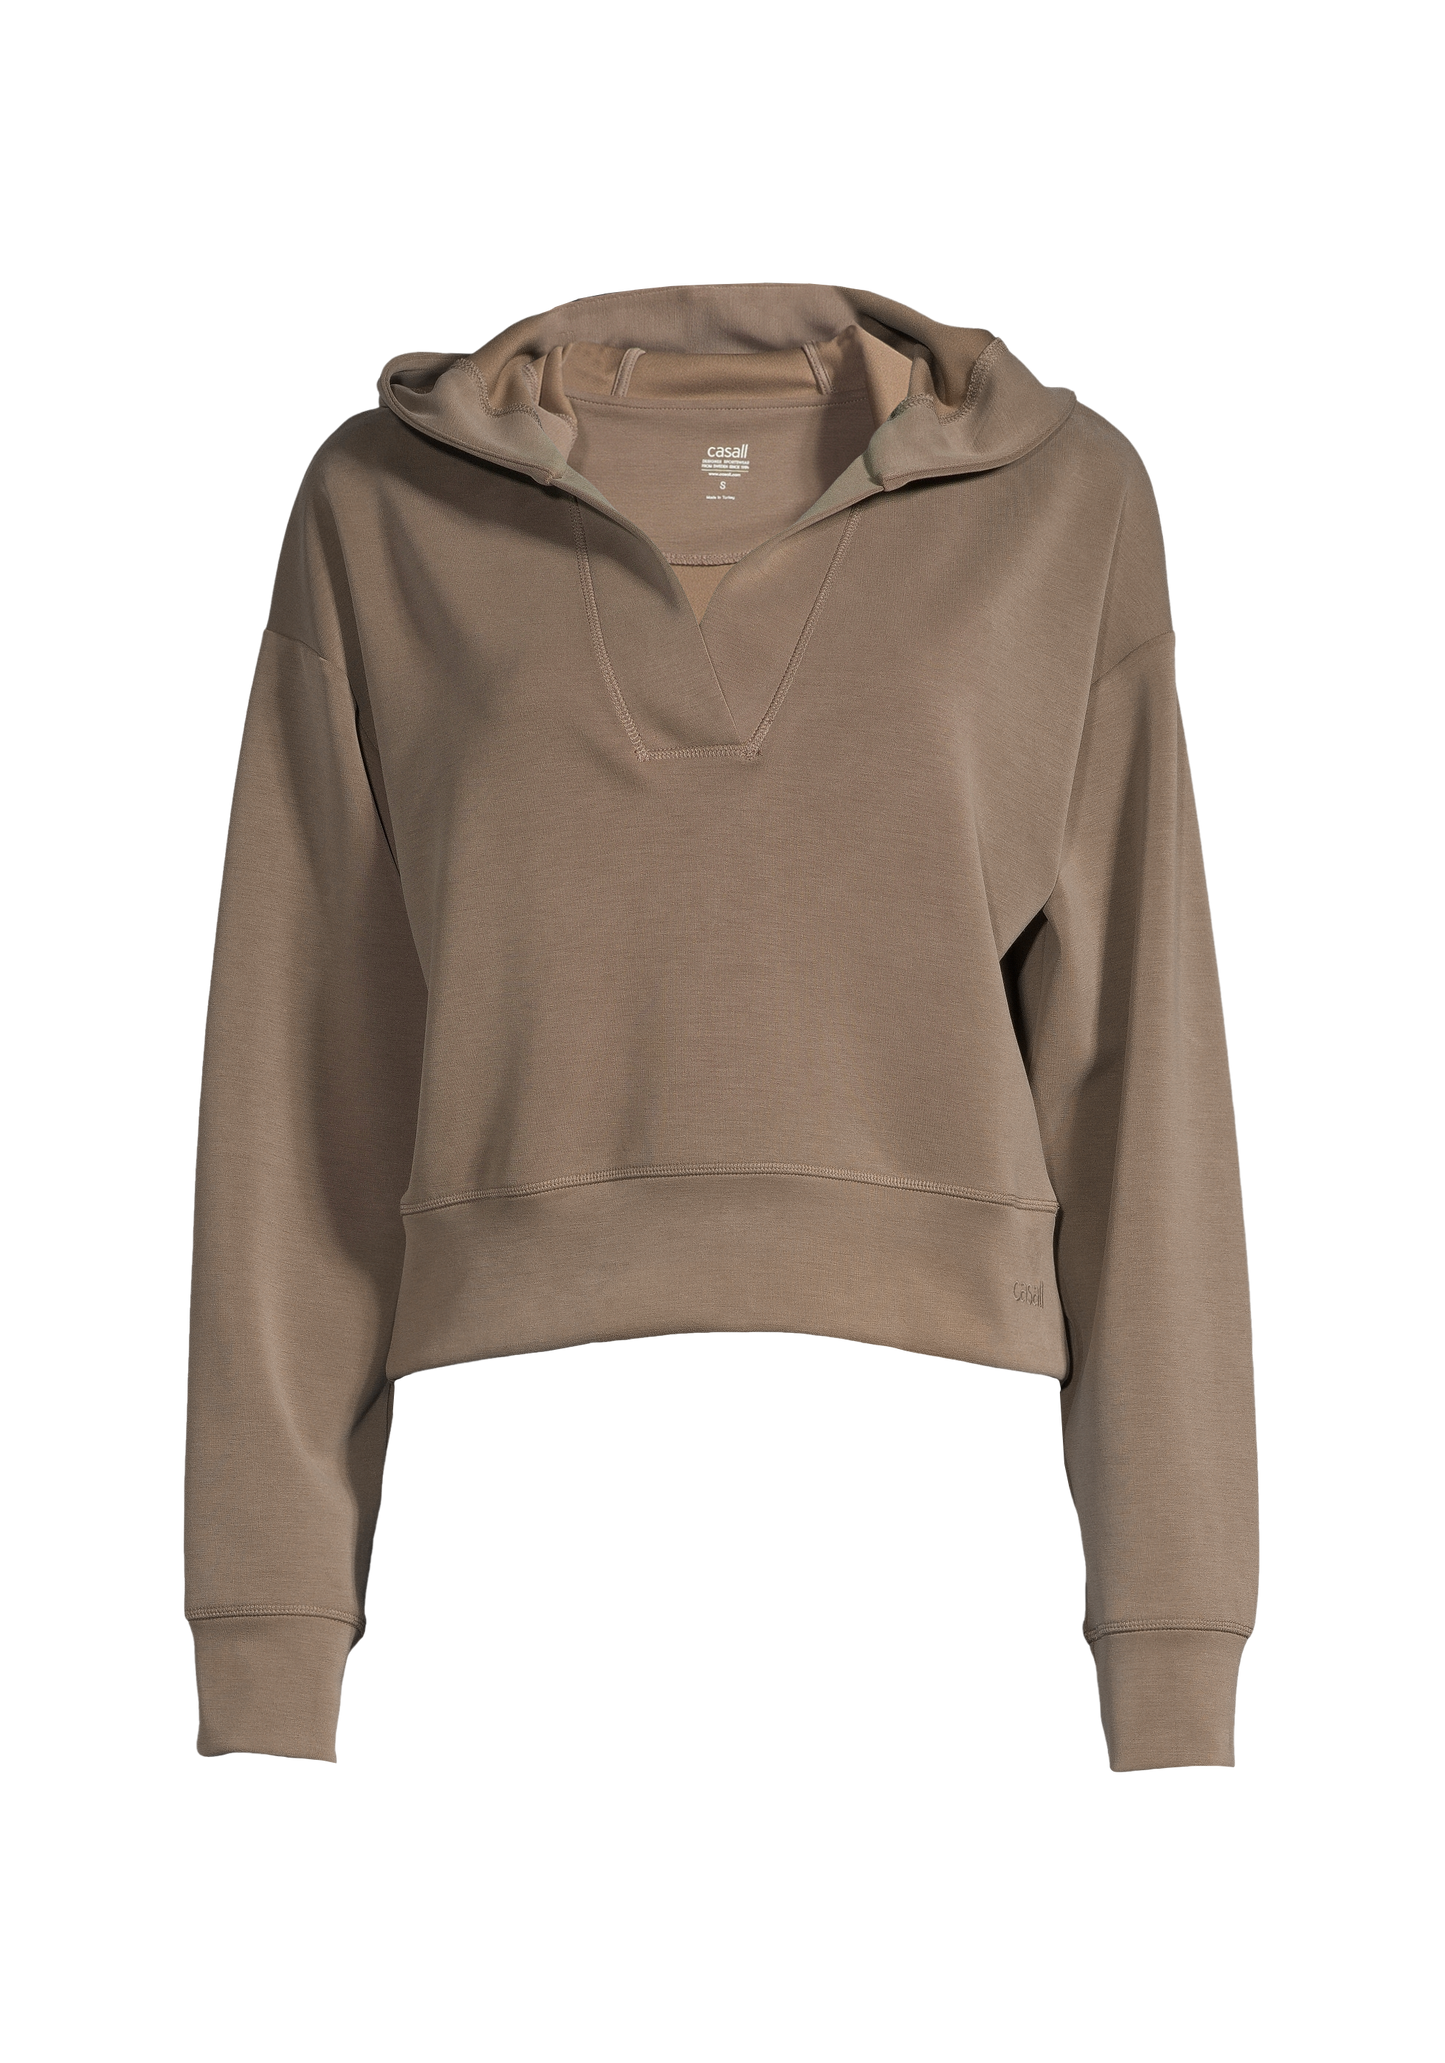 Casall - Peachy V-Neck Hoodie - Taupe Brown (D)